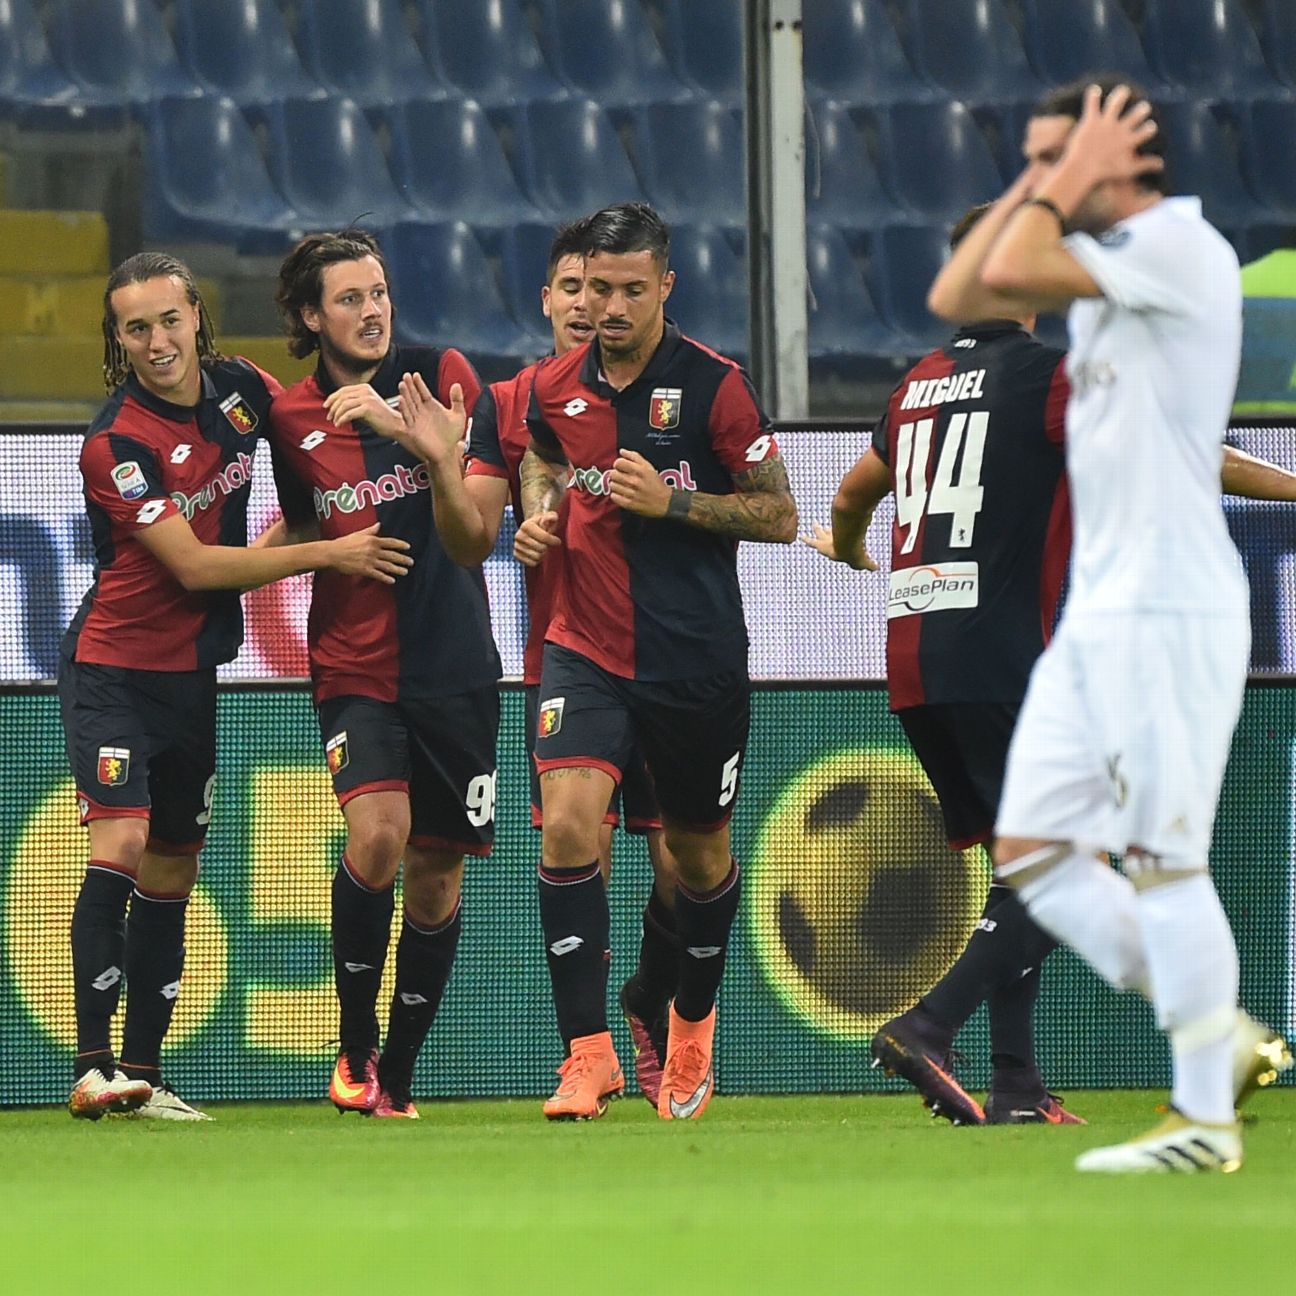 Summary and highlights of Genoa 0-0 Empoli in Serie A